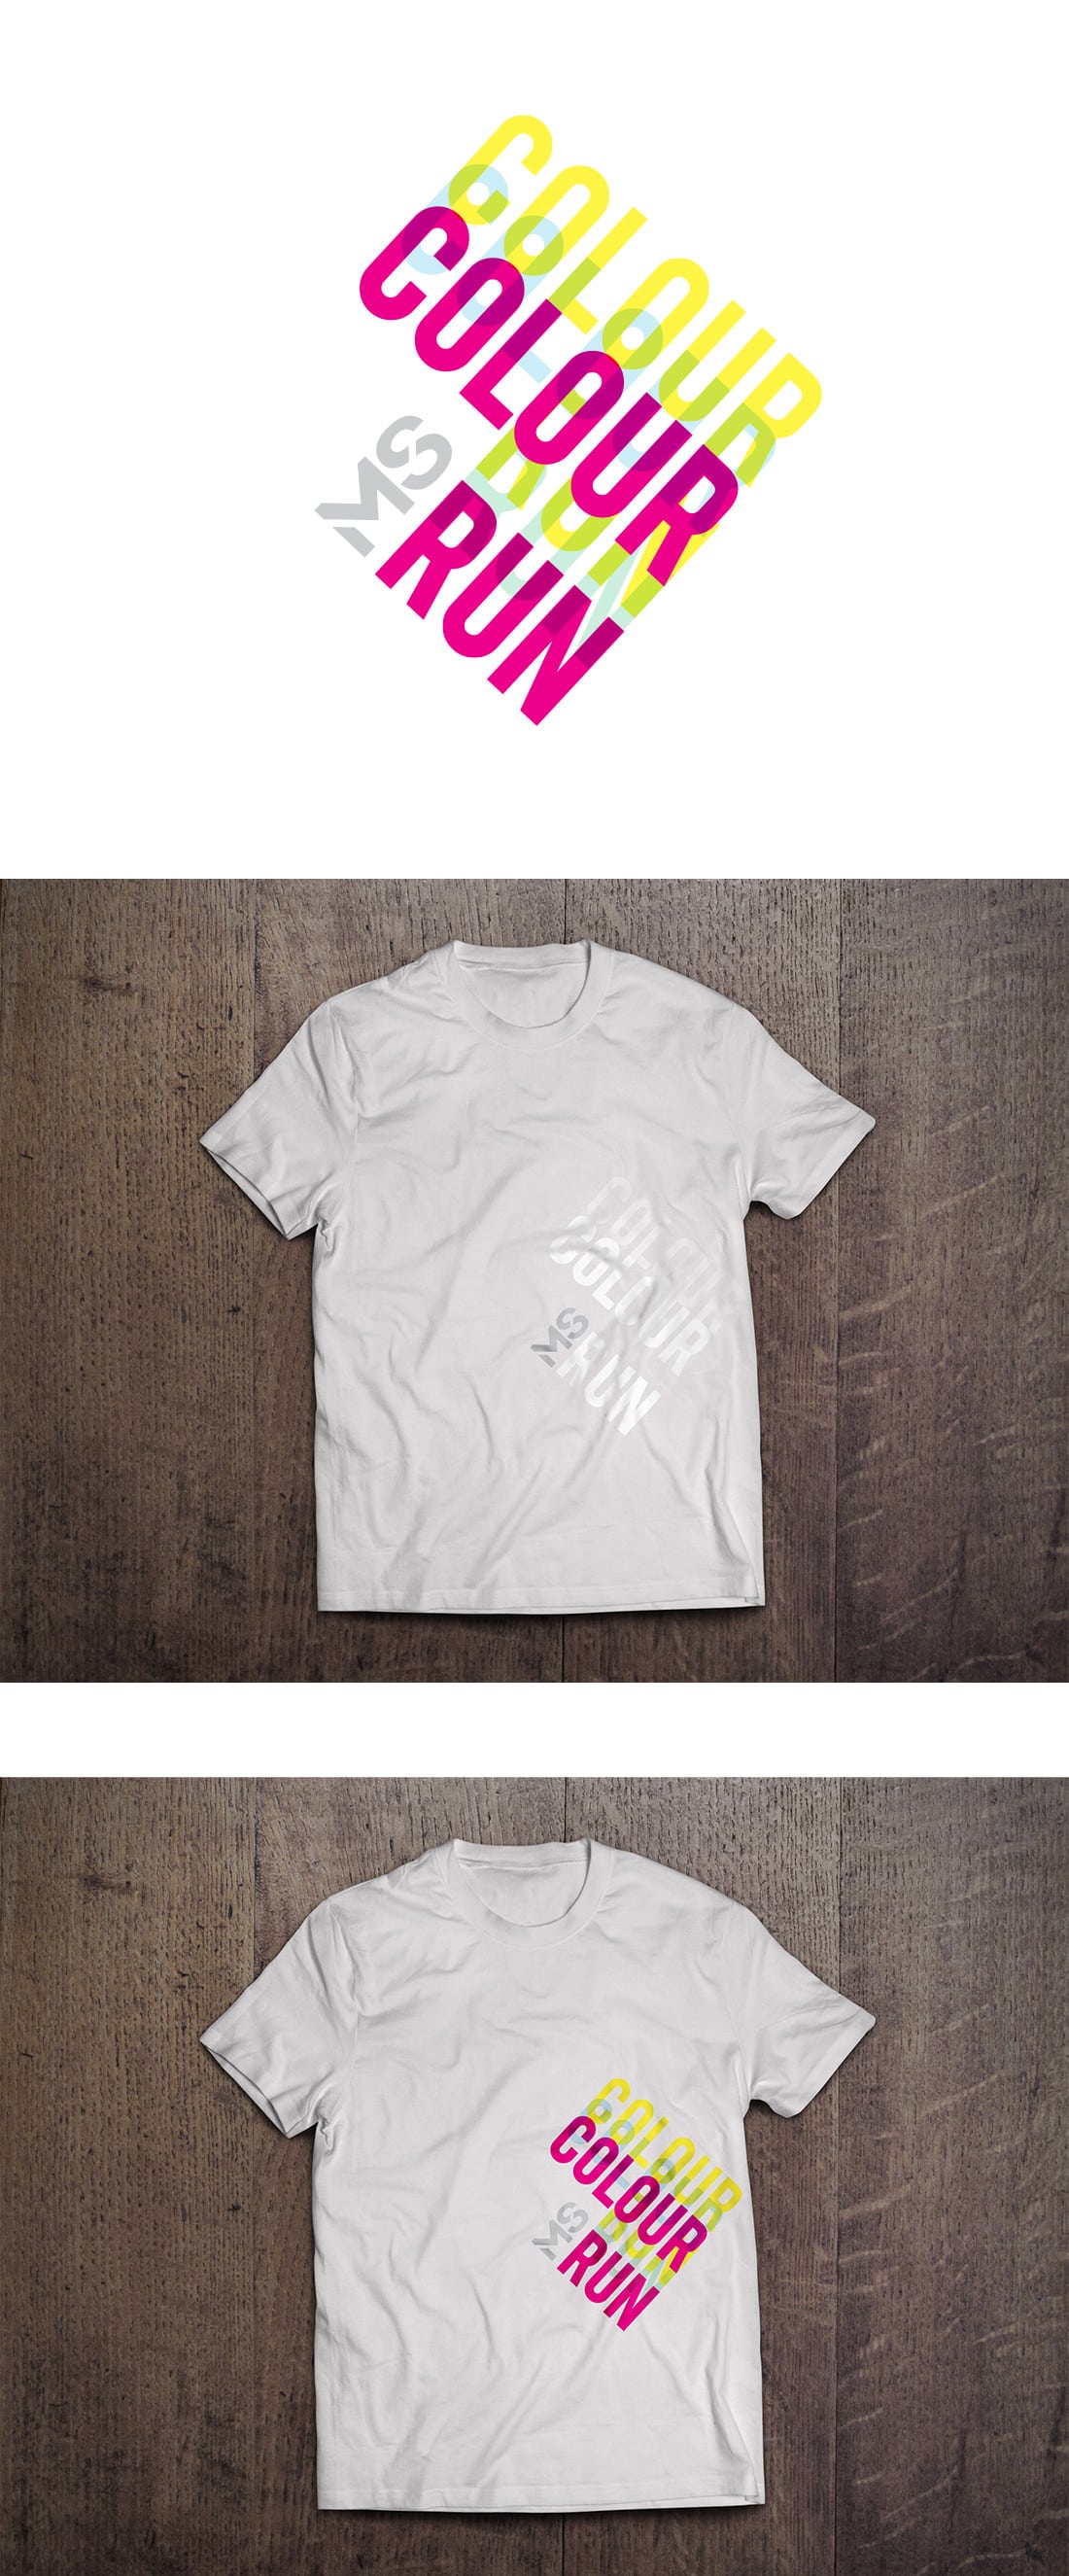 MS Colour run brand identity for 2013 on t-shirts